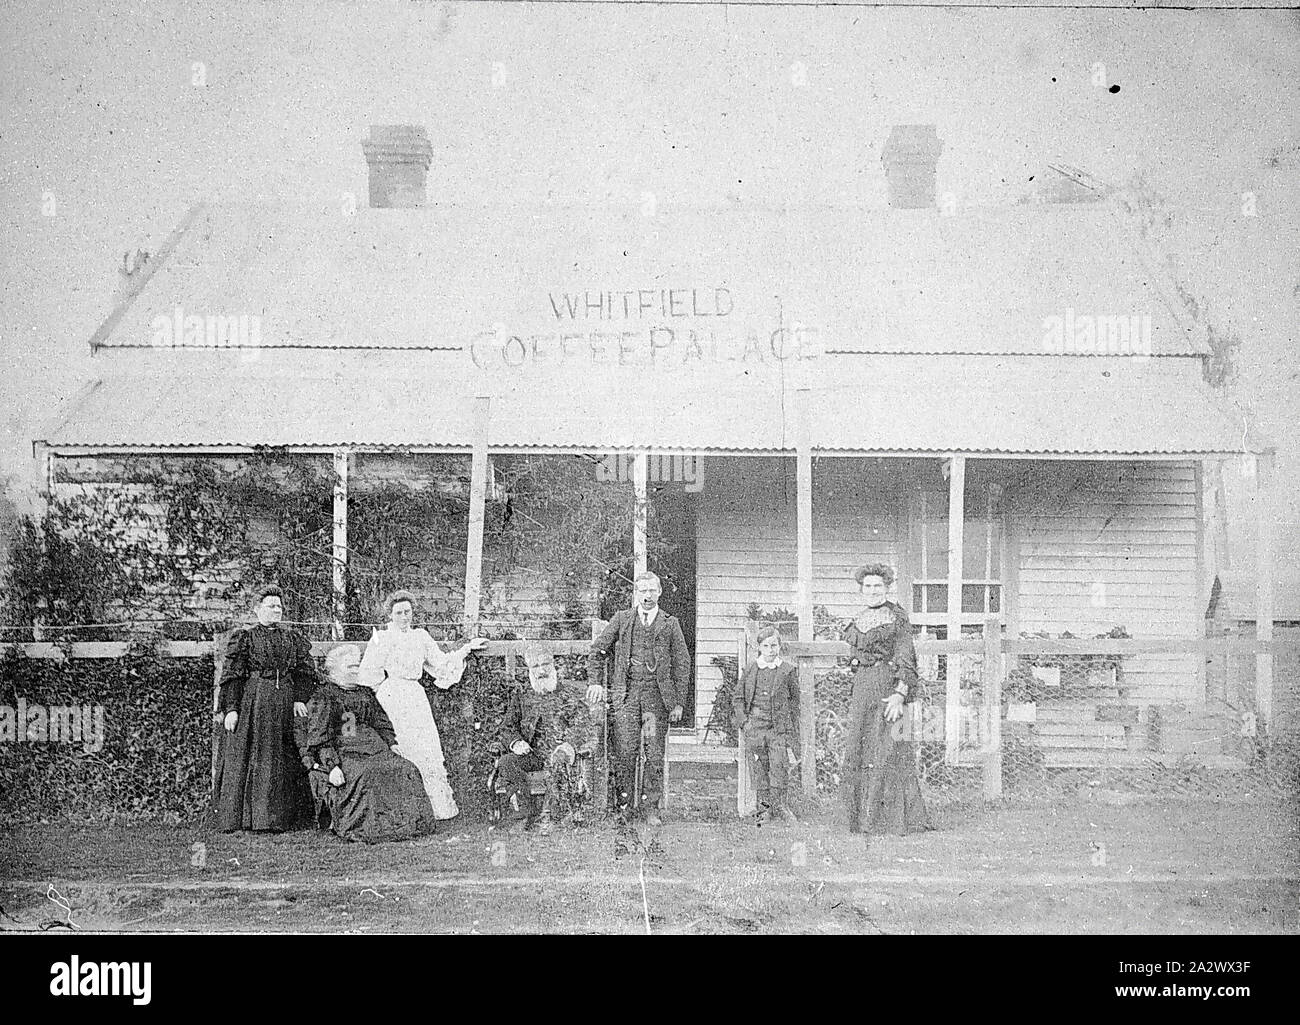 Negative - Whitfield, Victoria, circa 1905, A family group in front of the Whitfield Coffee Palace. It is a weatherboard building, two brick chimneys with a verandah across the front. It is fenced with posts and wire netting Stock Photo